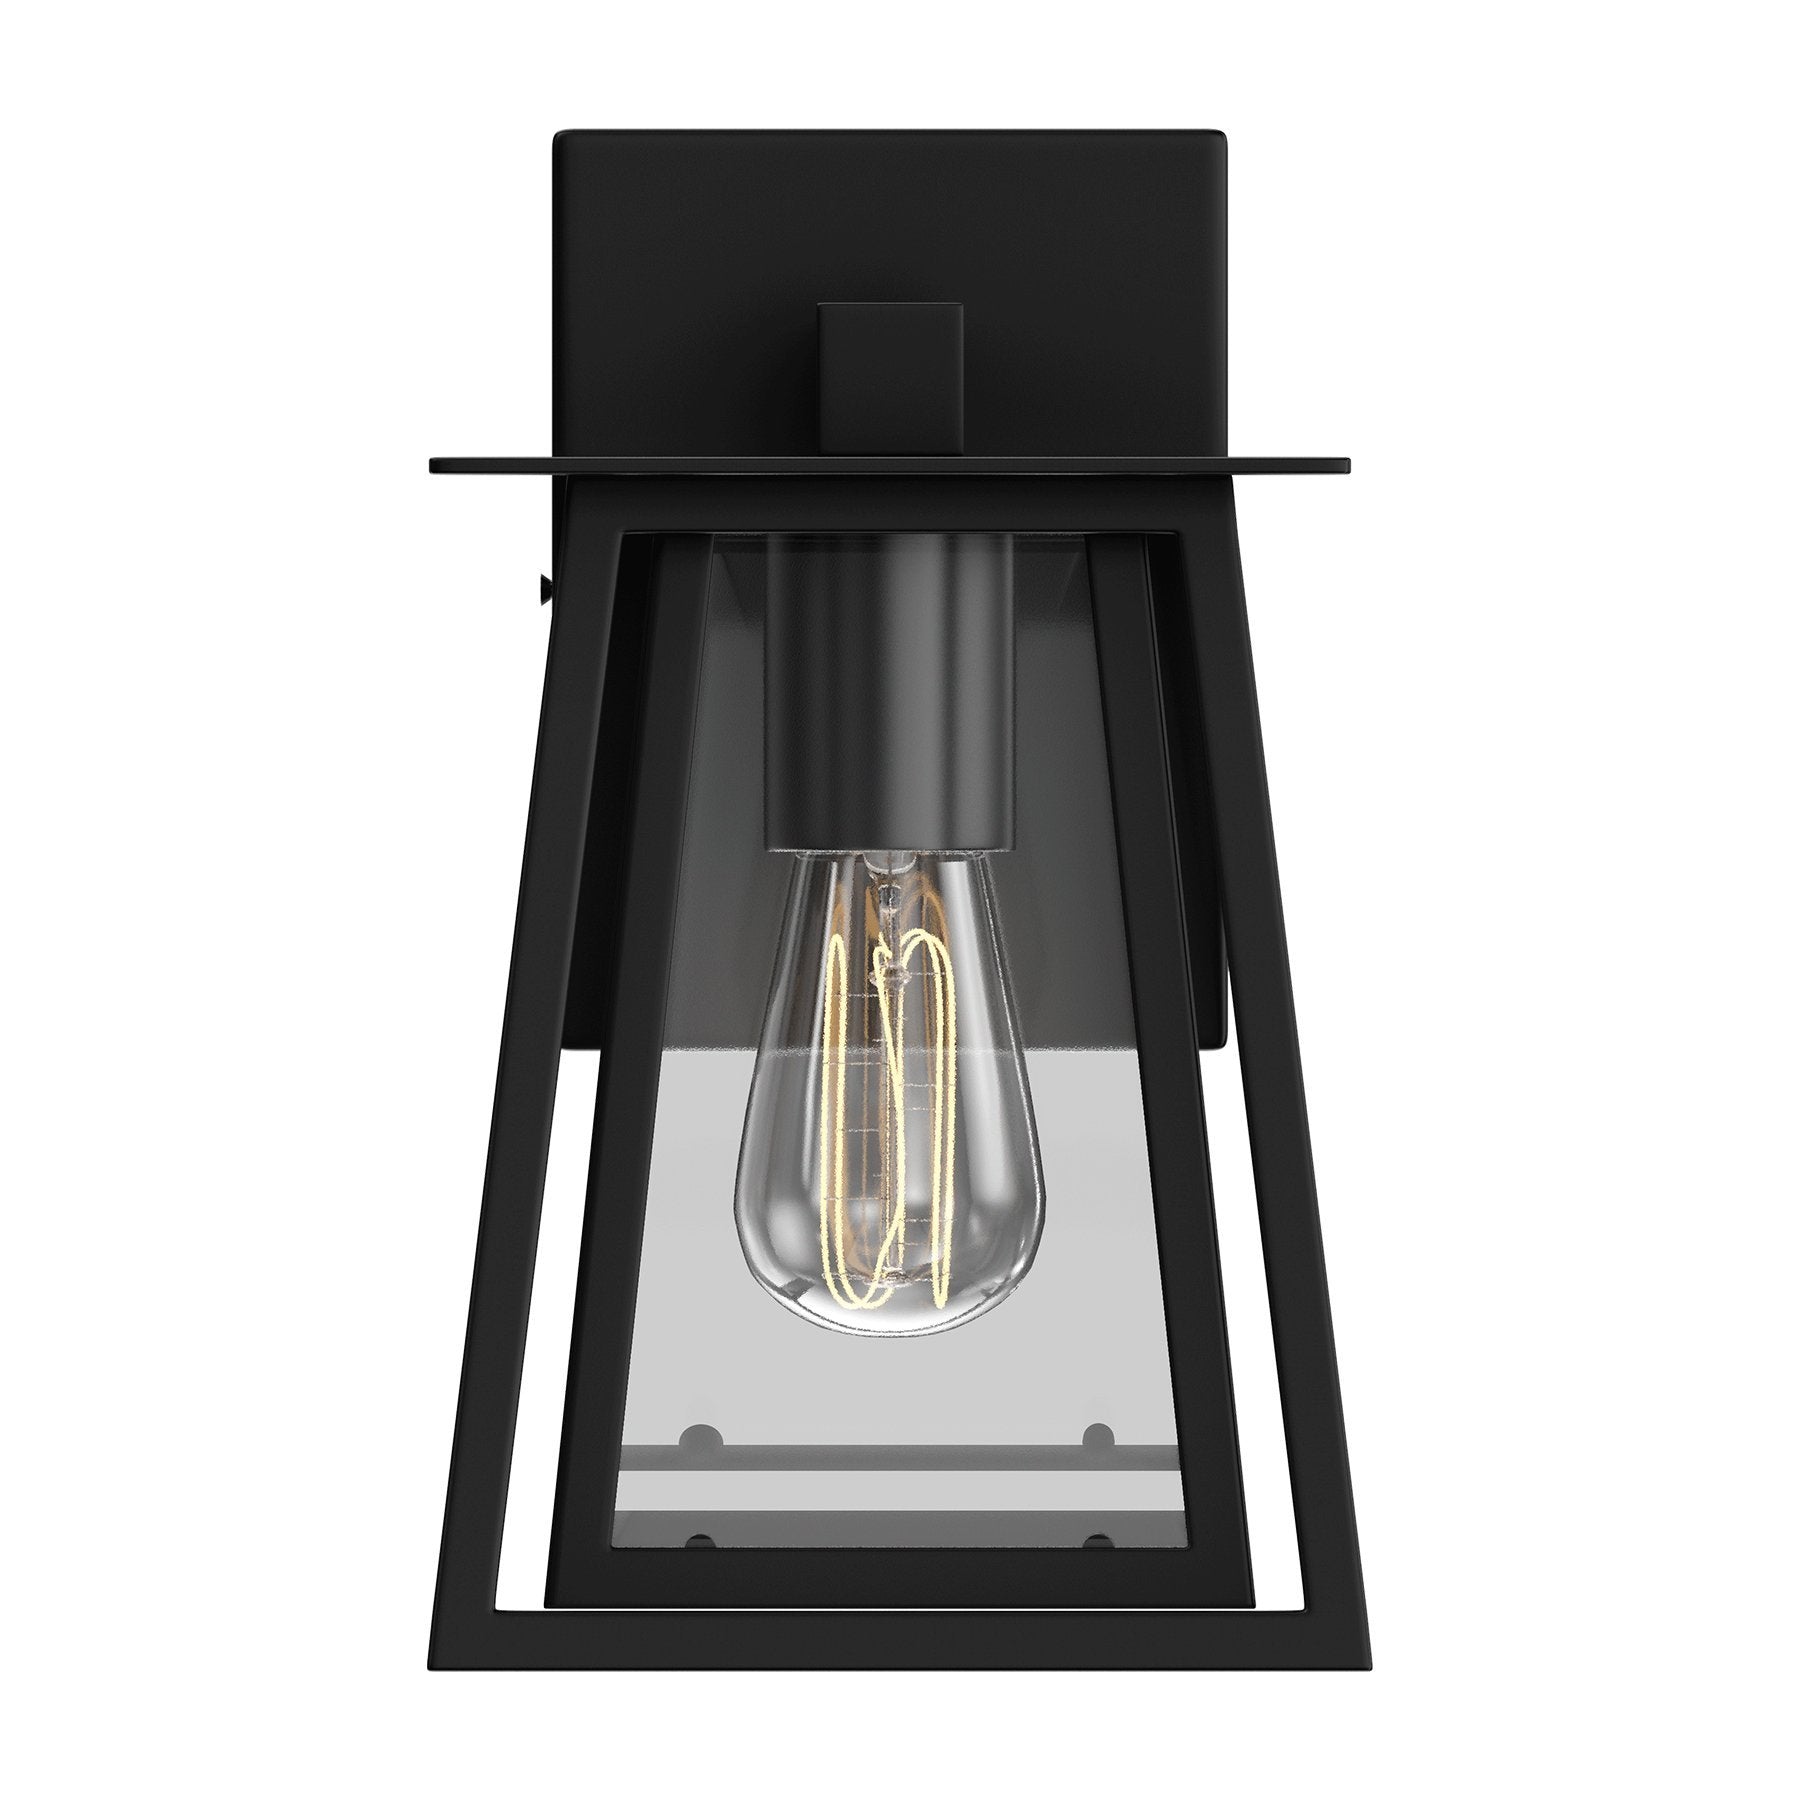 Wall Sconce Fixture, UL Listed for Damp Location, E26 Socket Wall Lamp, Matte Black Finish, Hallway Light Fixtures